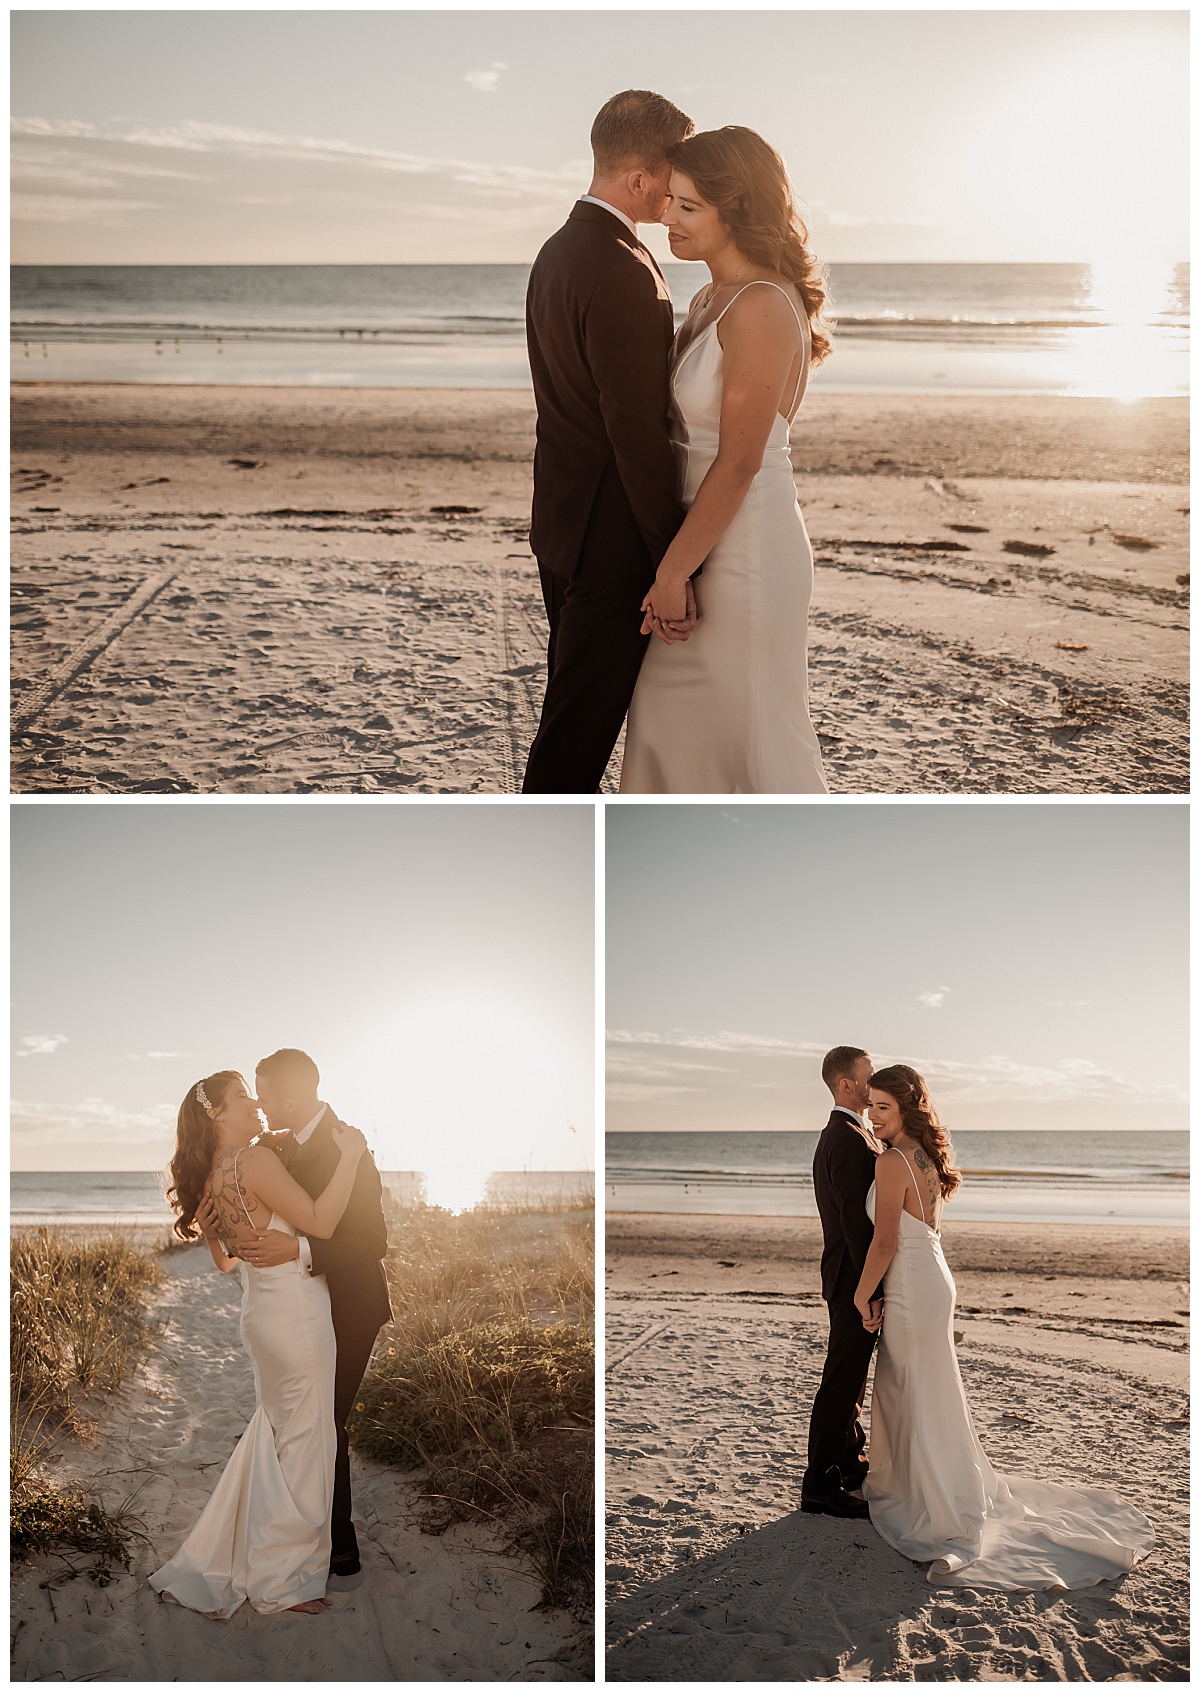 Bride and groom embrace on the beach at sunset for their wedding photos by Paisley Sunshine, a Florida wedding photographer. 